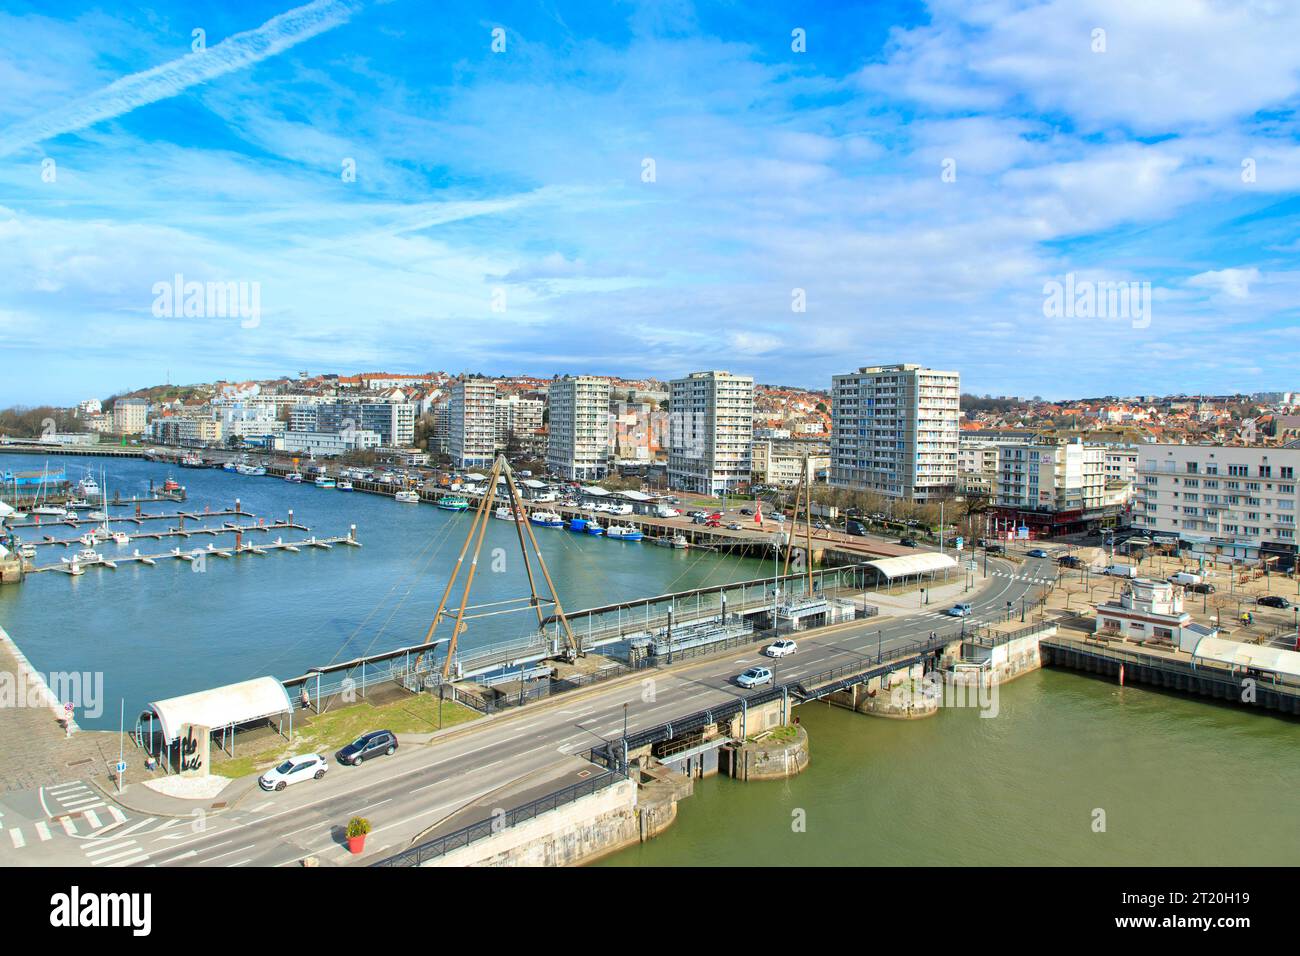 Boulogne-sur-Mer (northern France): overview of the fishing port and buildings along Boulevard Gambetta Stock Photo